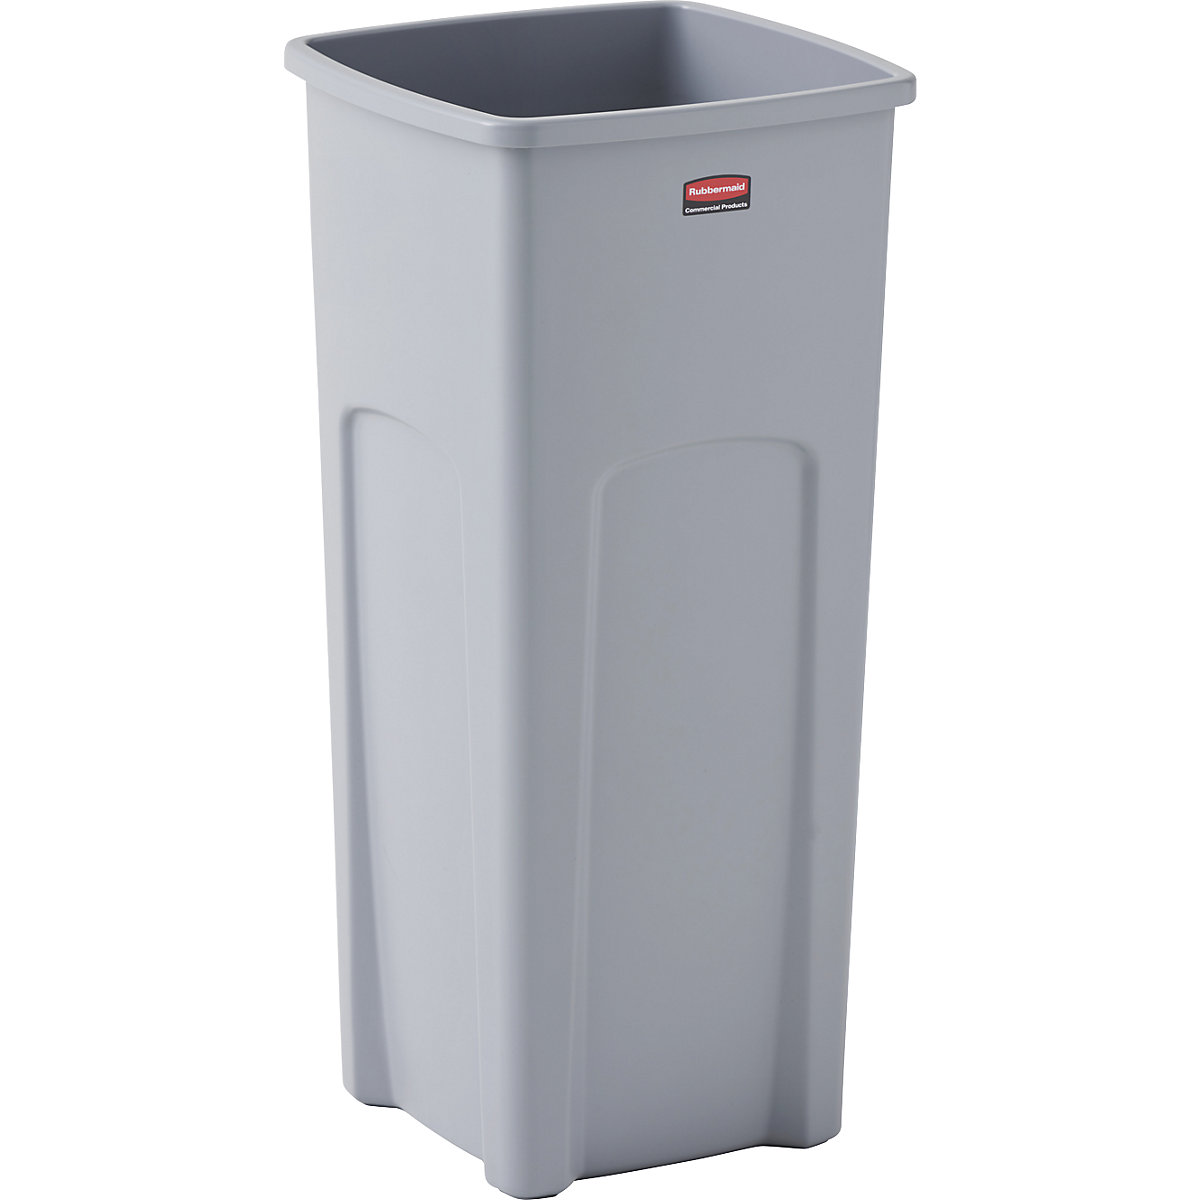 UNTOUCHABLE® recyclable waste container – Rubbermaid